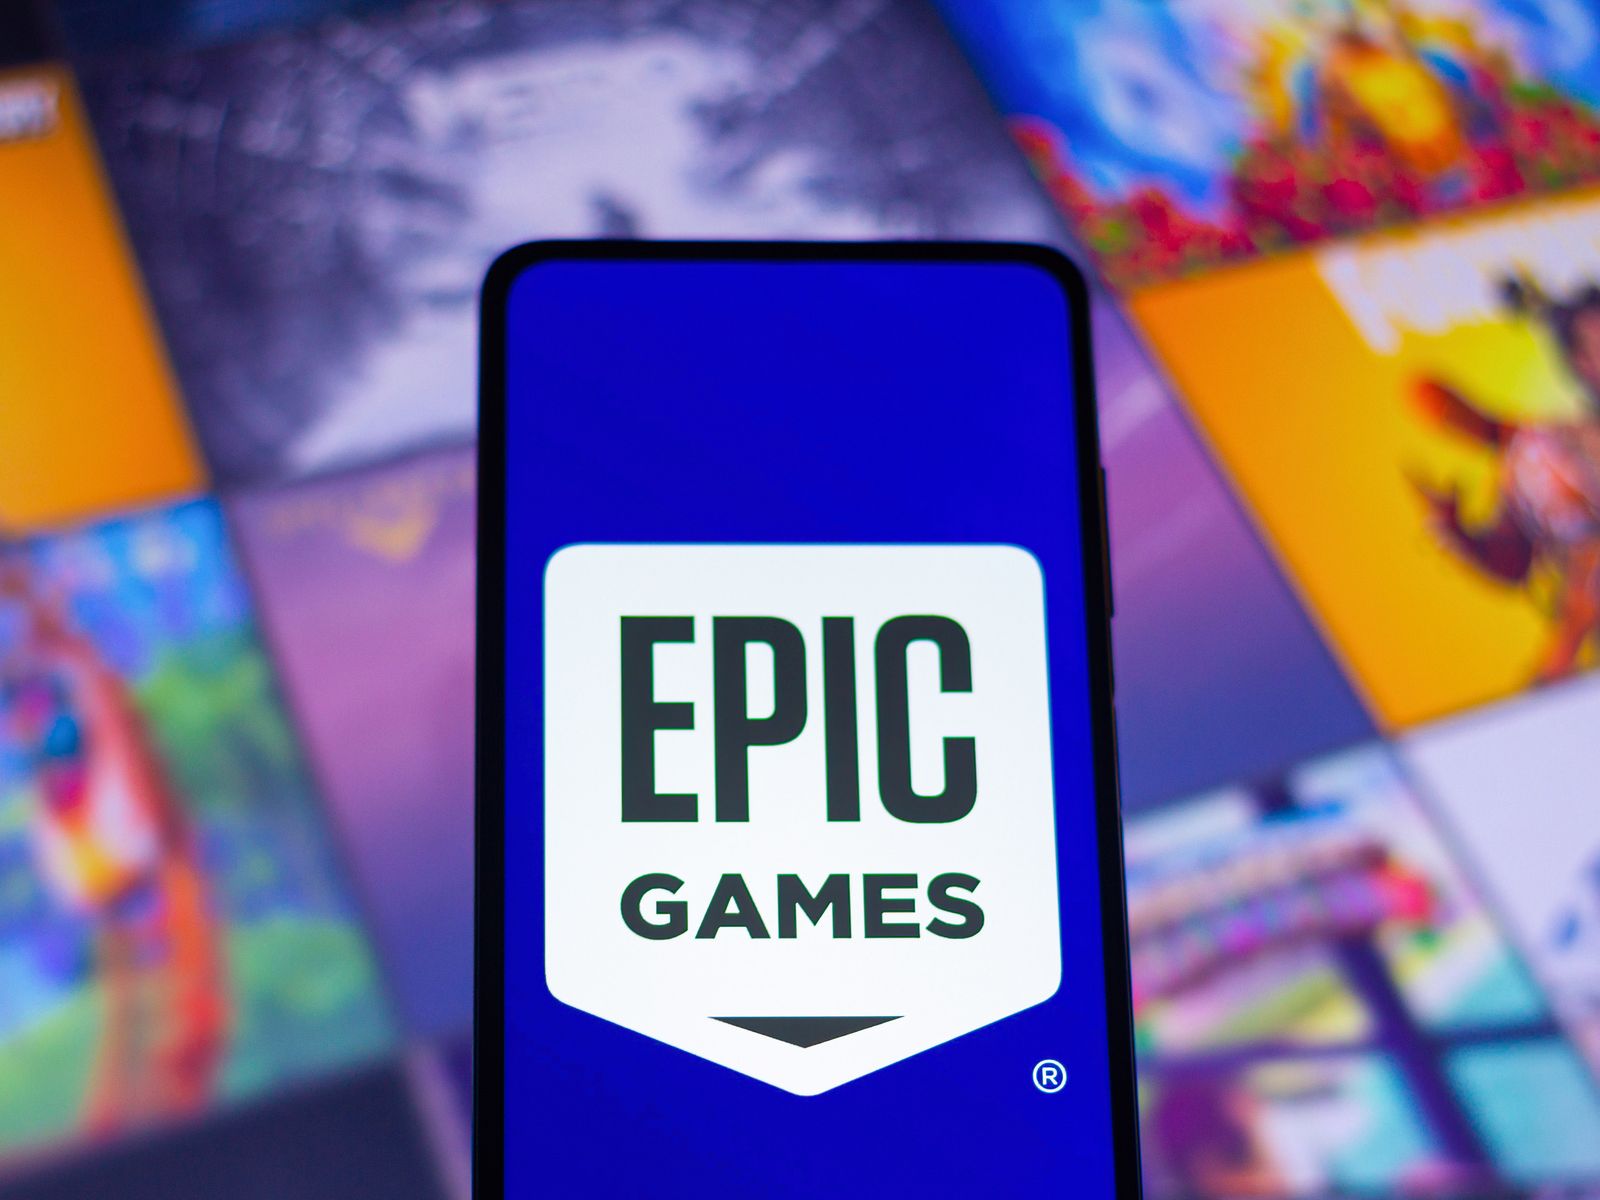 Fortnite for Android is finally on the Play Store, after Epic